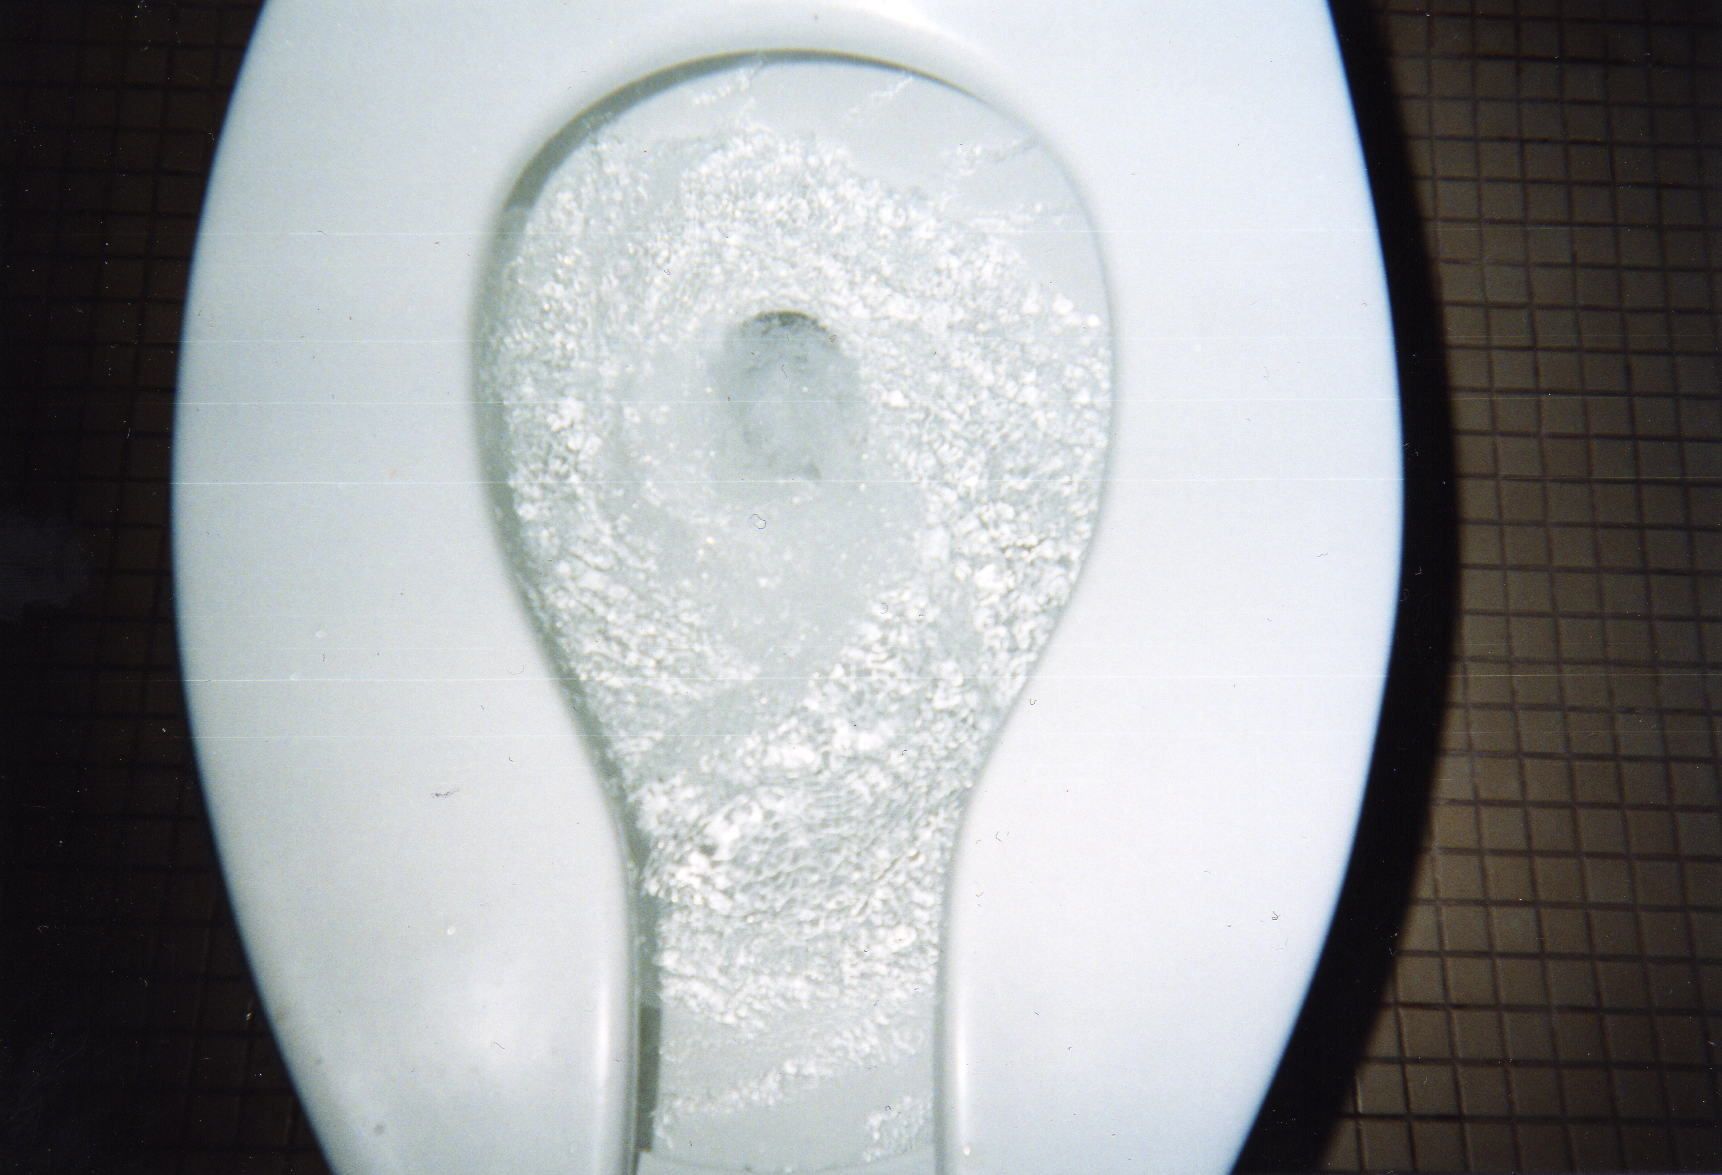 Add a cup of baking soda to the toilet, leave it for an hour, and then flush. It